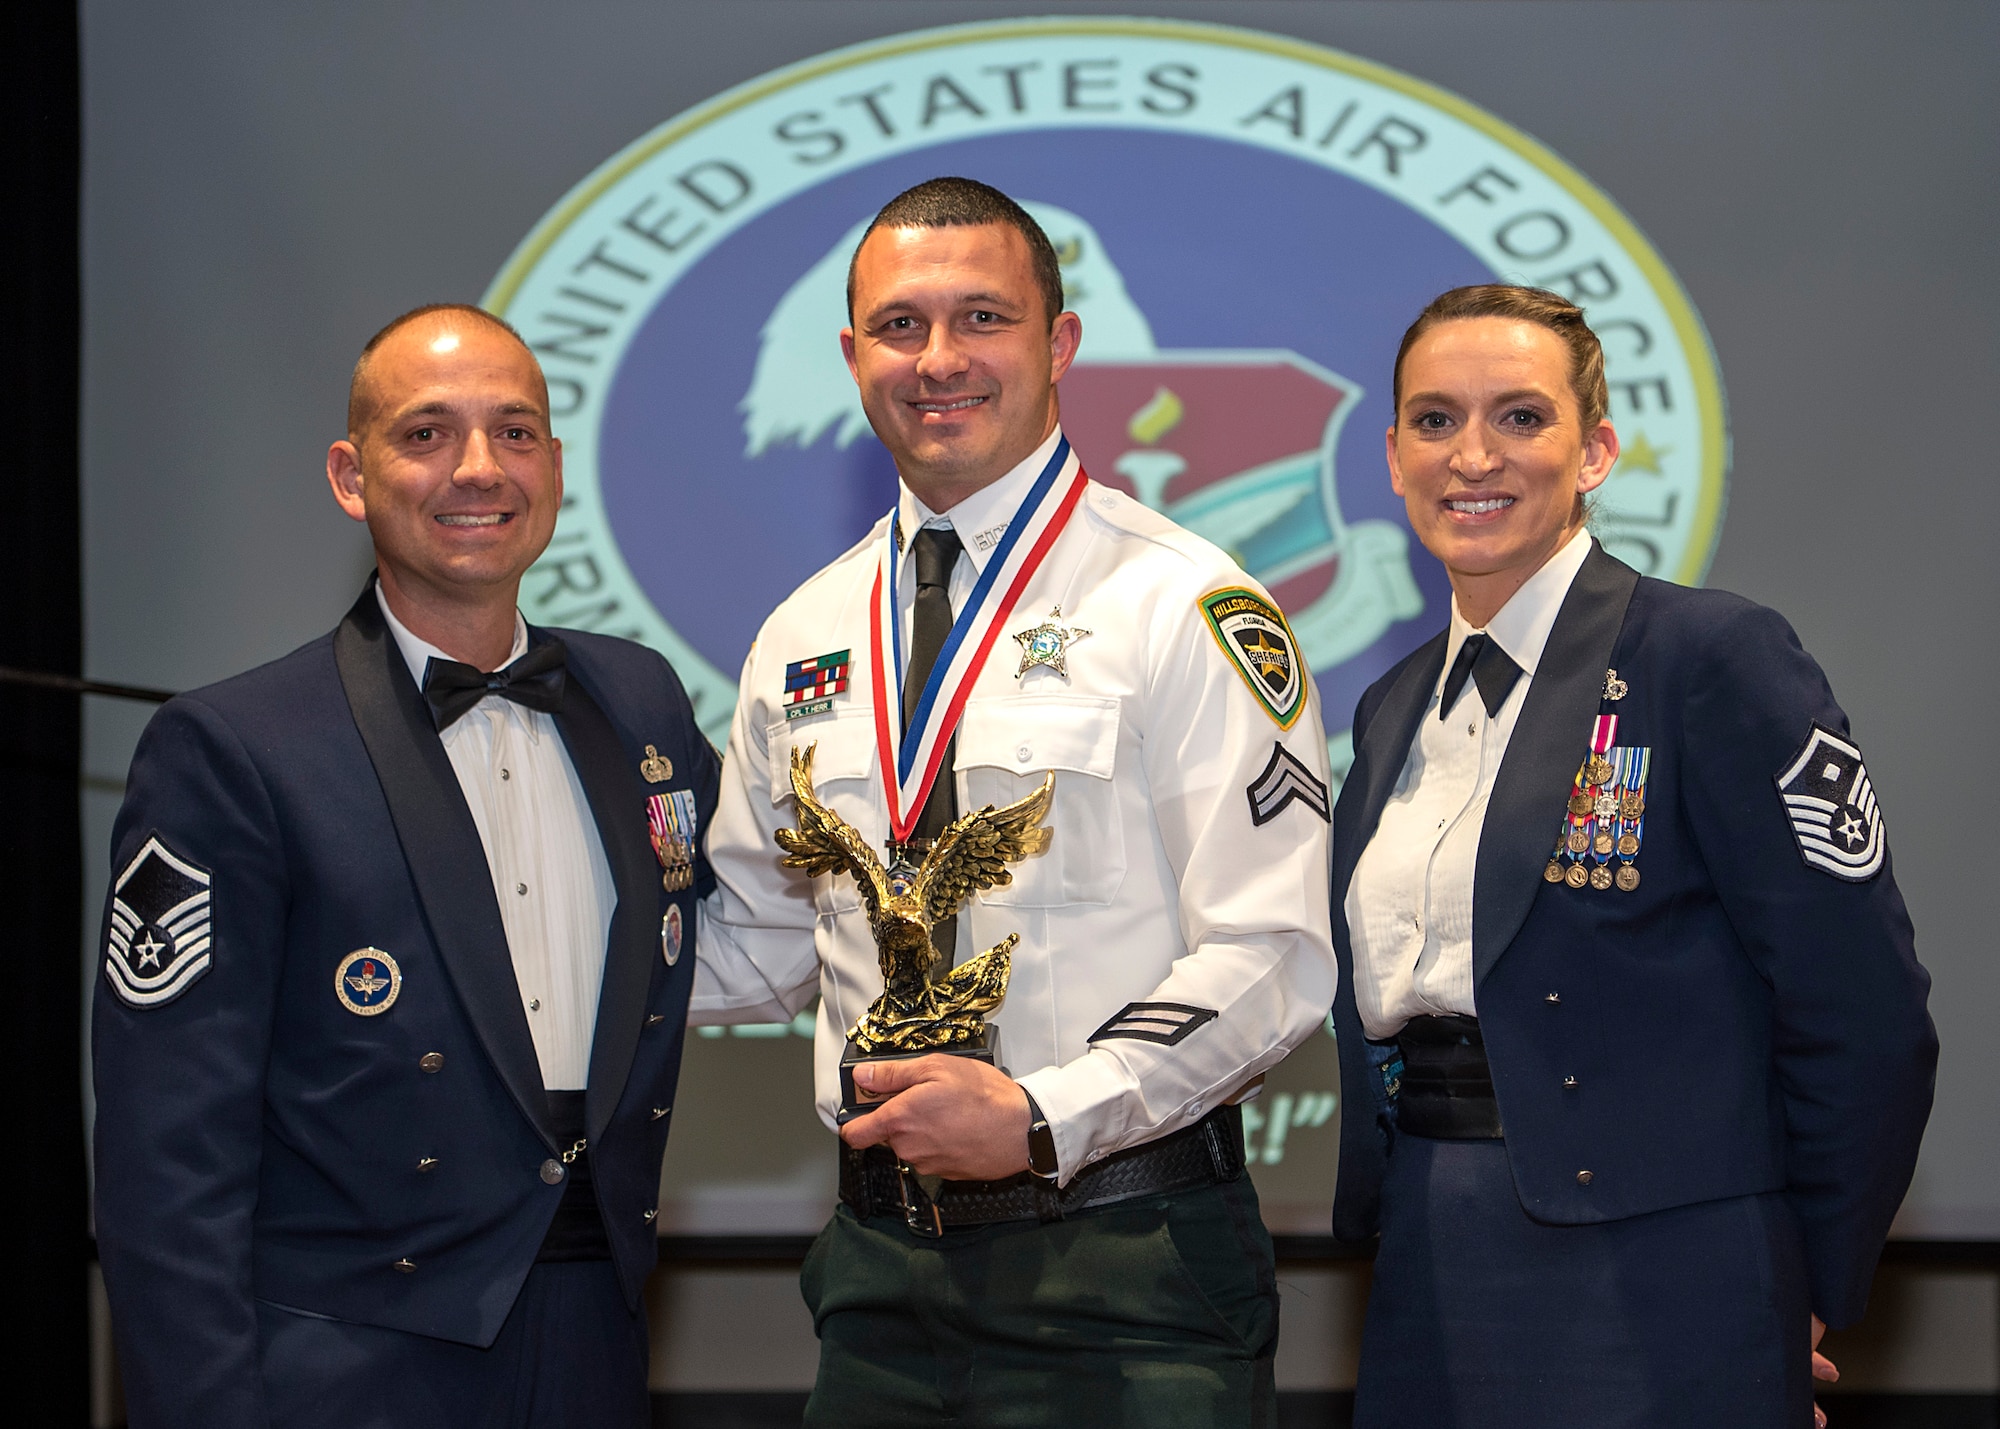 Hillsborough County Sherriff’s Office Cpl. Tommy Herr, accepts the Commandant Award during an Airman Leadership School (ALS) graduation at MacDill Air Force Base, Fla., Dec. 4, 2019.